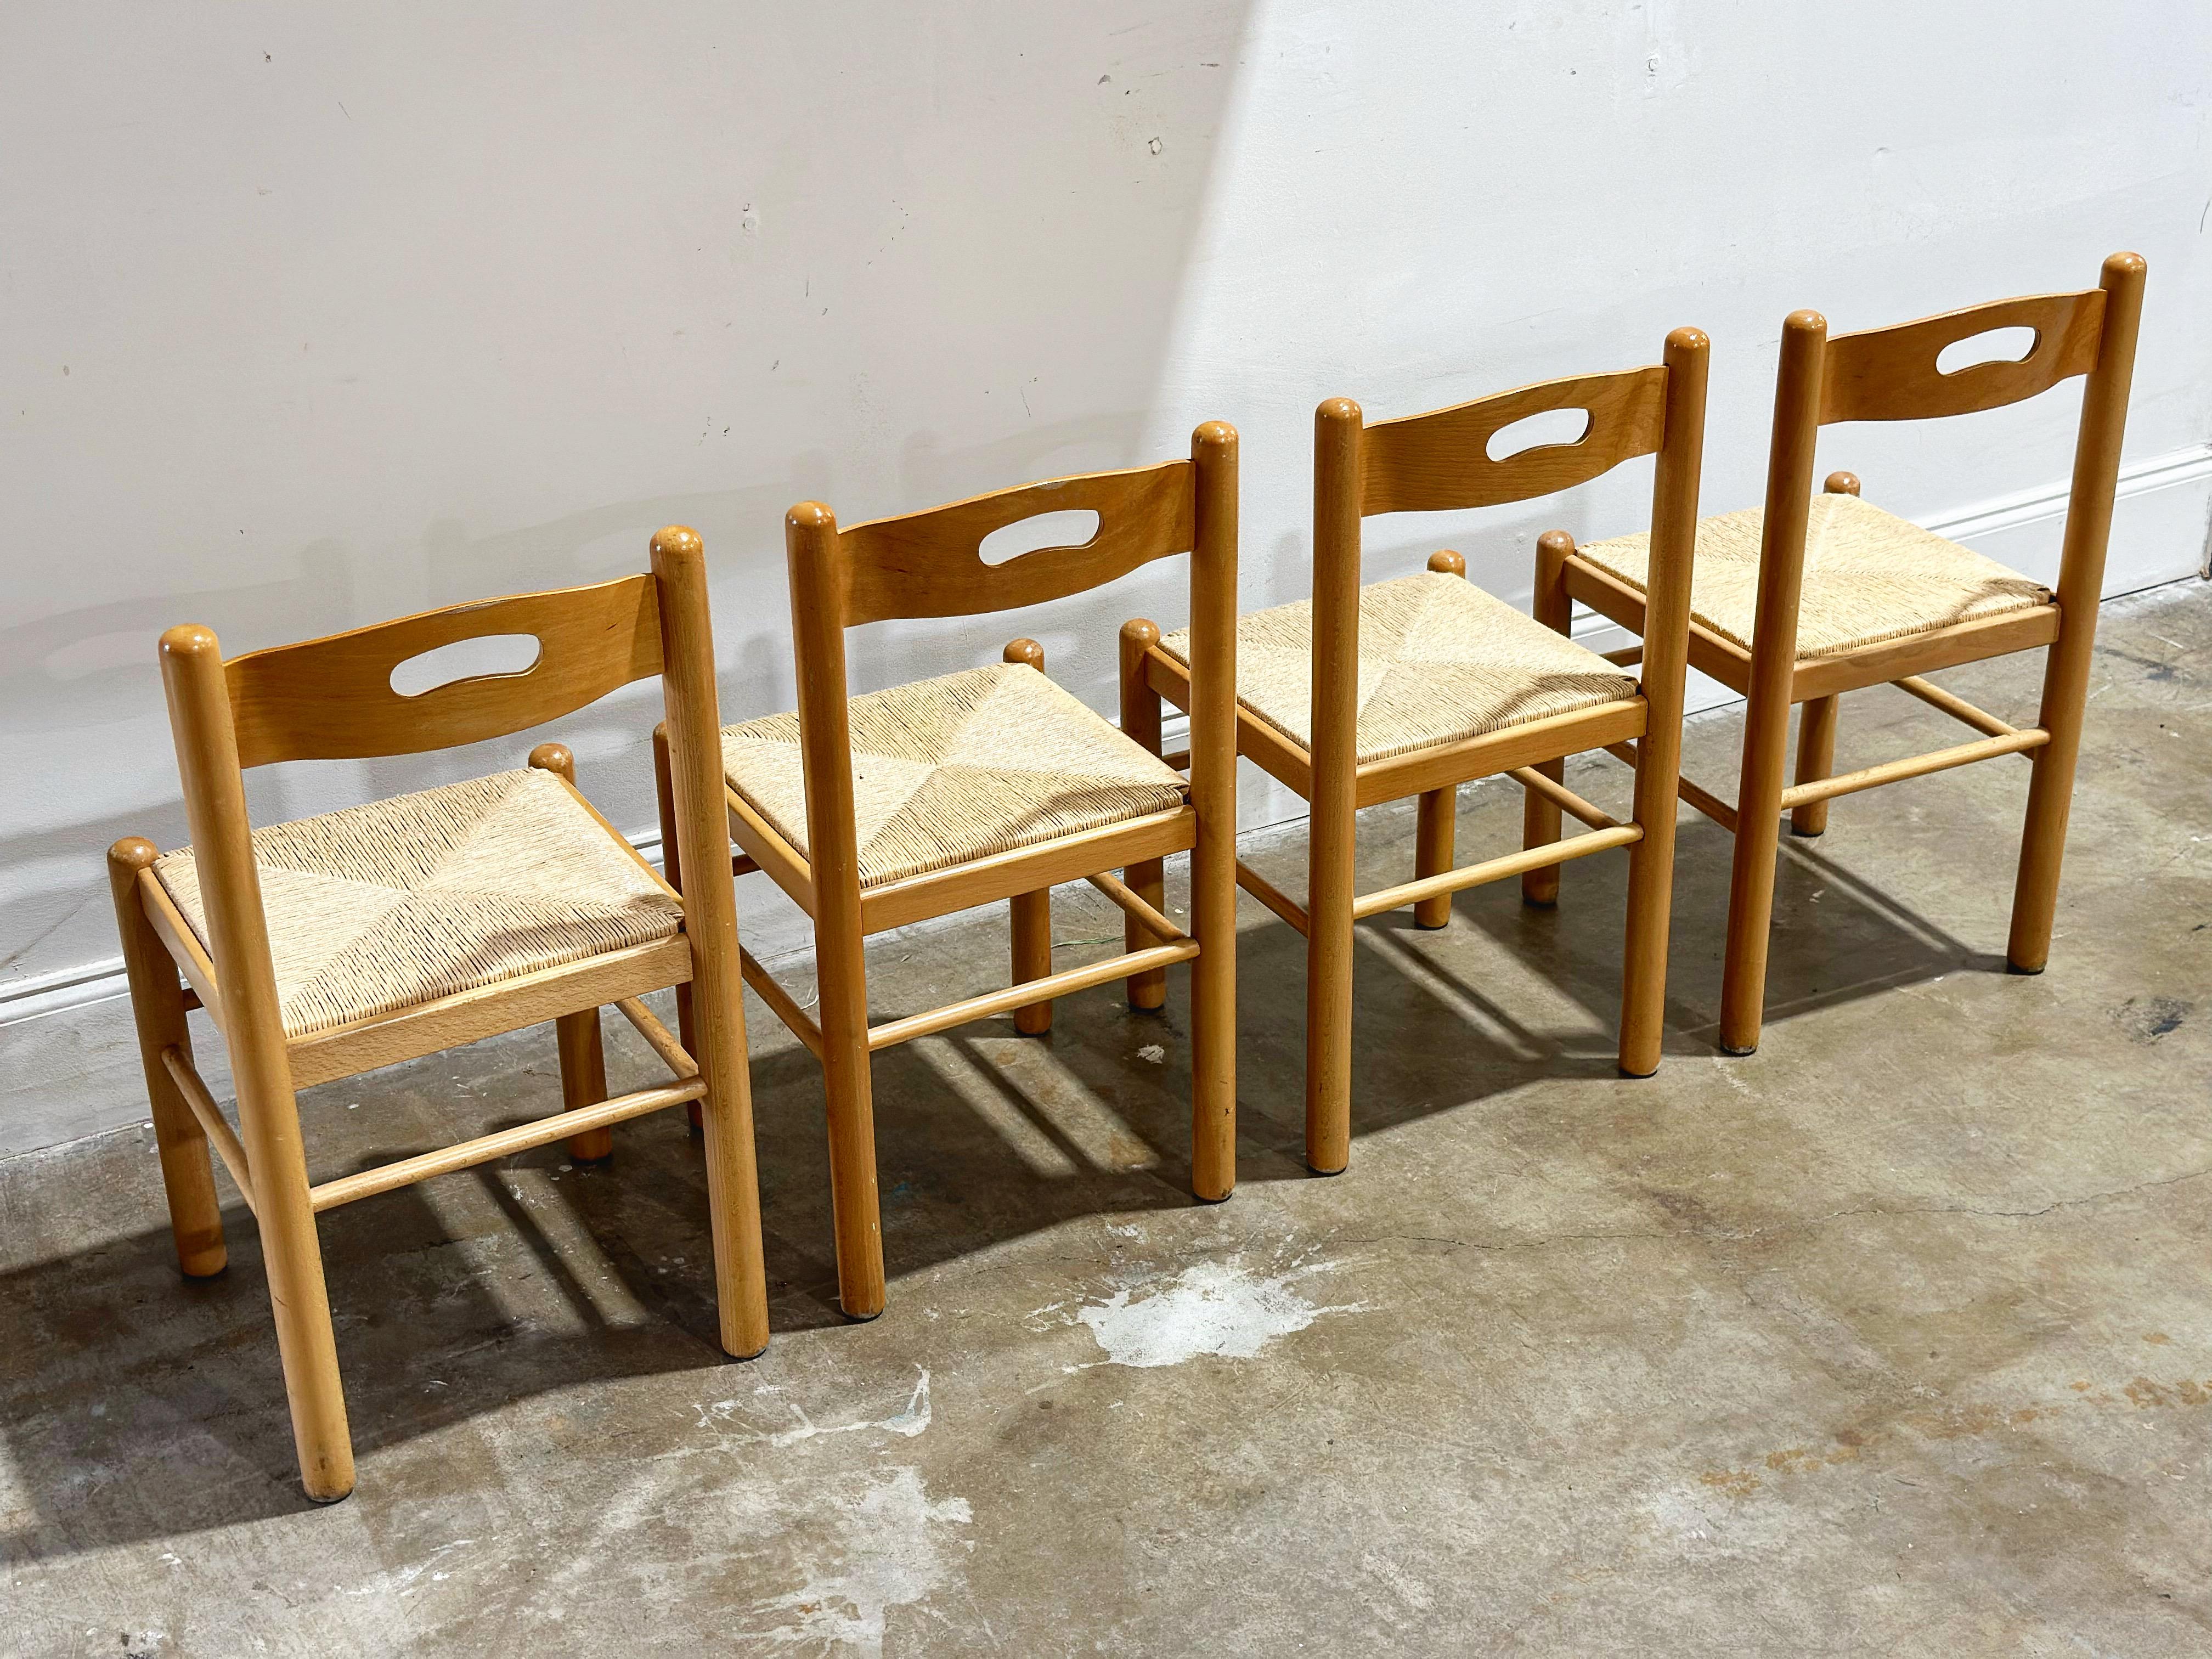 Late 20th Century Organic Modern Dining Chairs - Birch + Rush - Italy circa 1980s - Set of Six For Sale